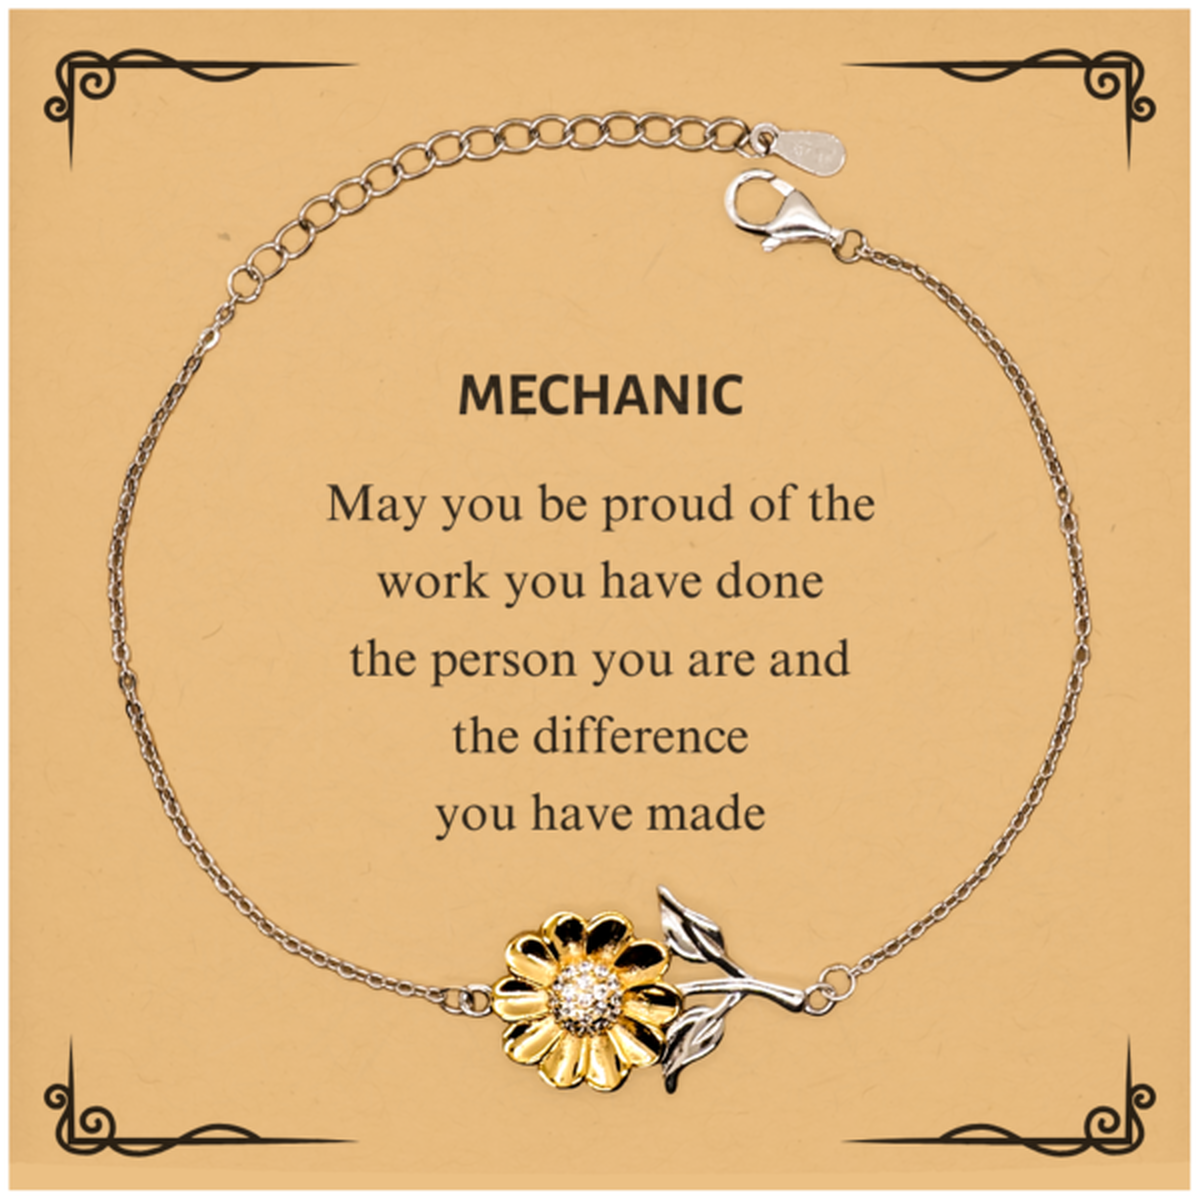 Mechanic May you be proud of the work you have done, Retirement Mechanic Sunflower Bracelet for Colleague Appreciation Gifts Amazing for Mechanic